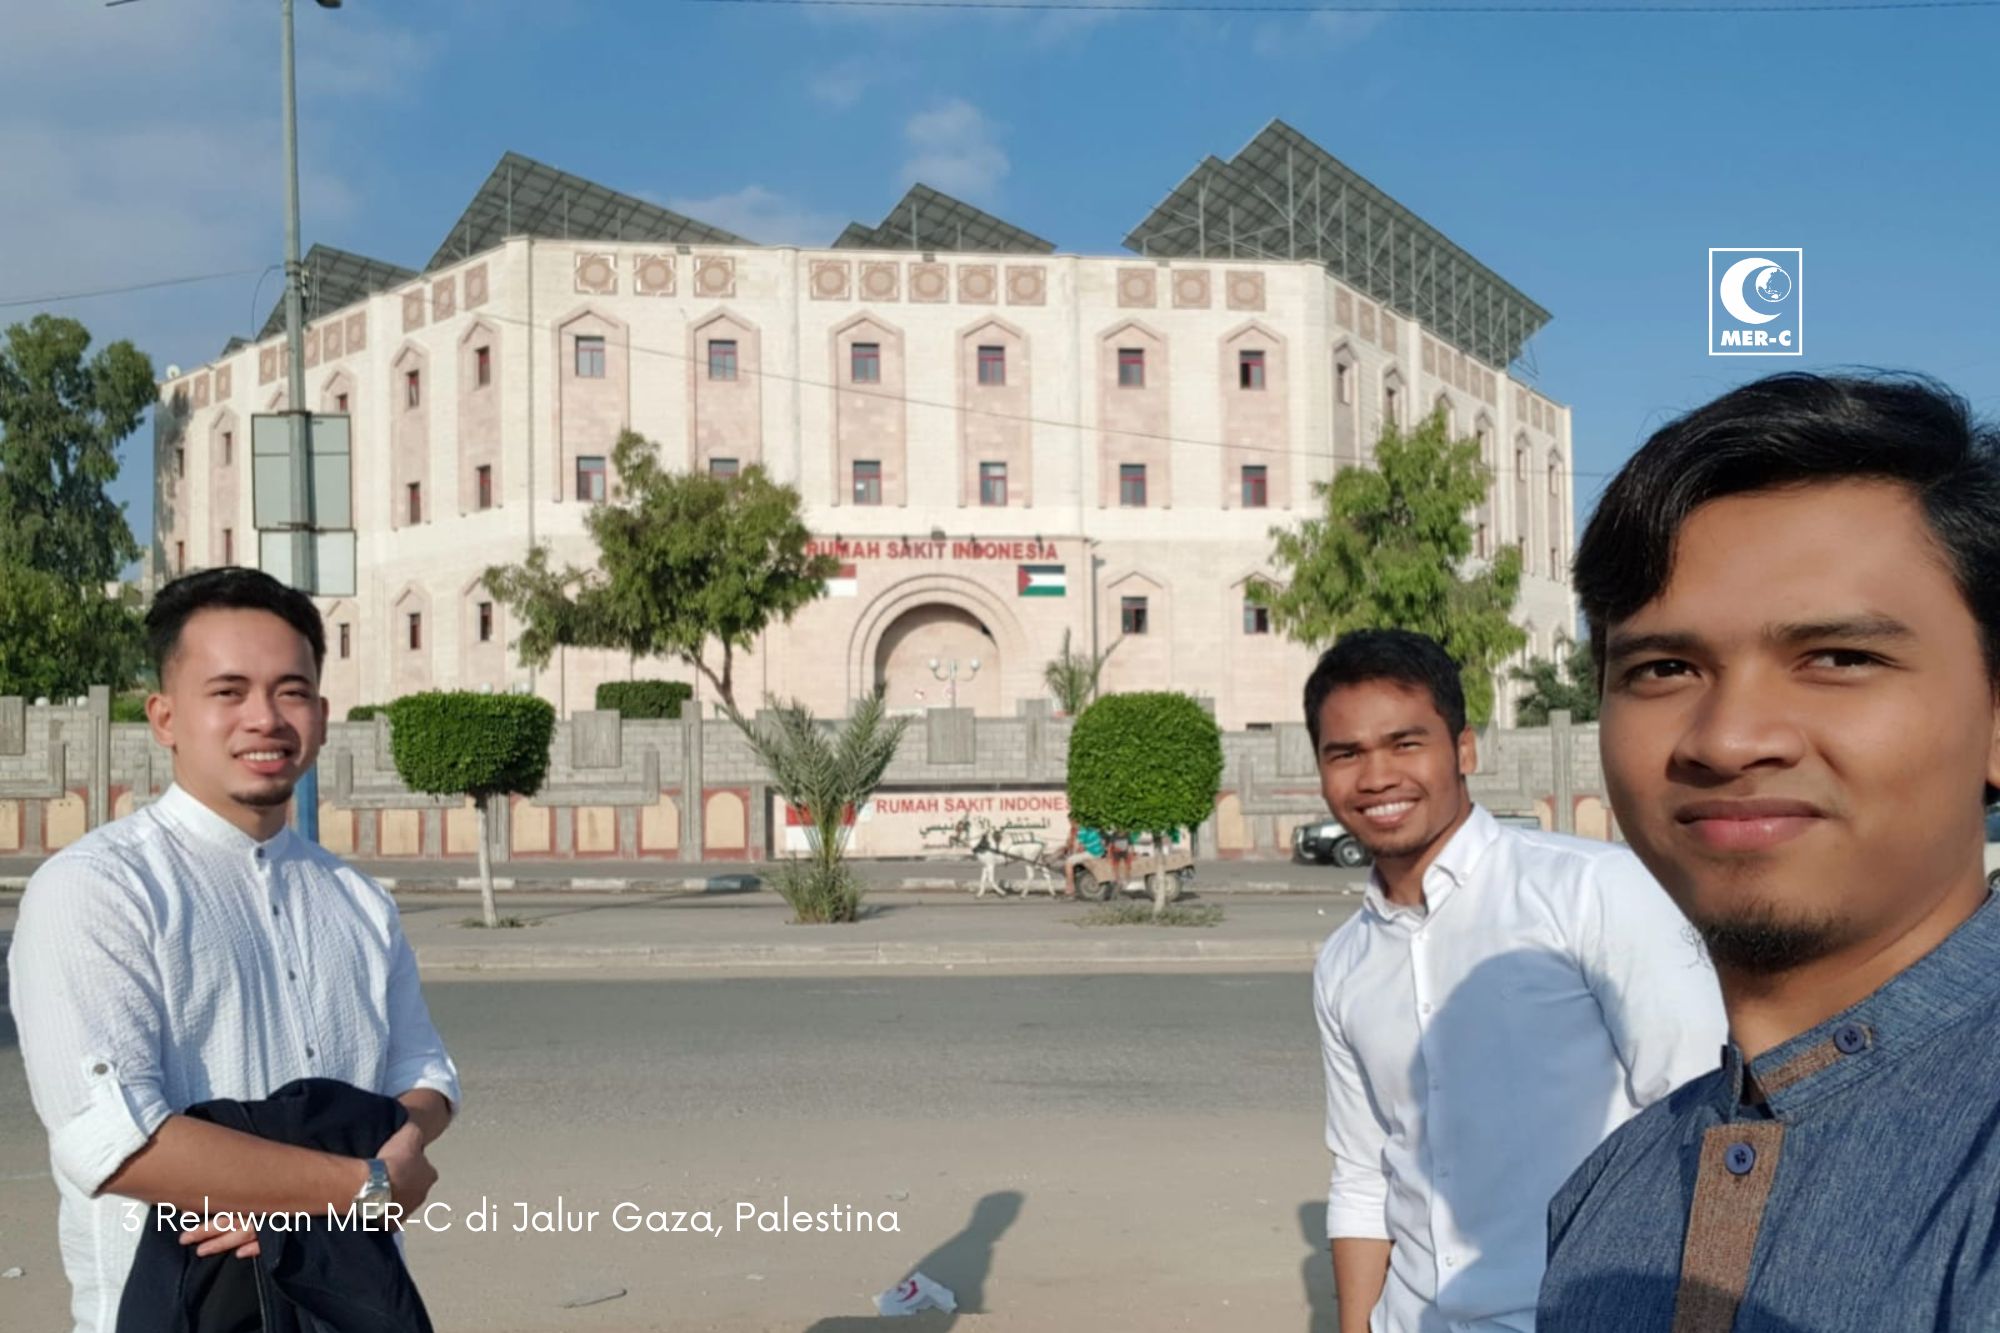 Fikri Rofiul Haq, left, is one of three Indonesia volunteers a the Indonesia Hospital in Gaza. The Indonesia Hospital is seen in the background during peacetime in the Palestinian enclave [Photo courtesy of MER-C]